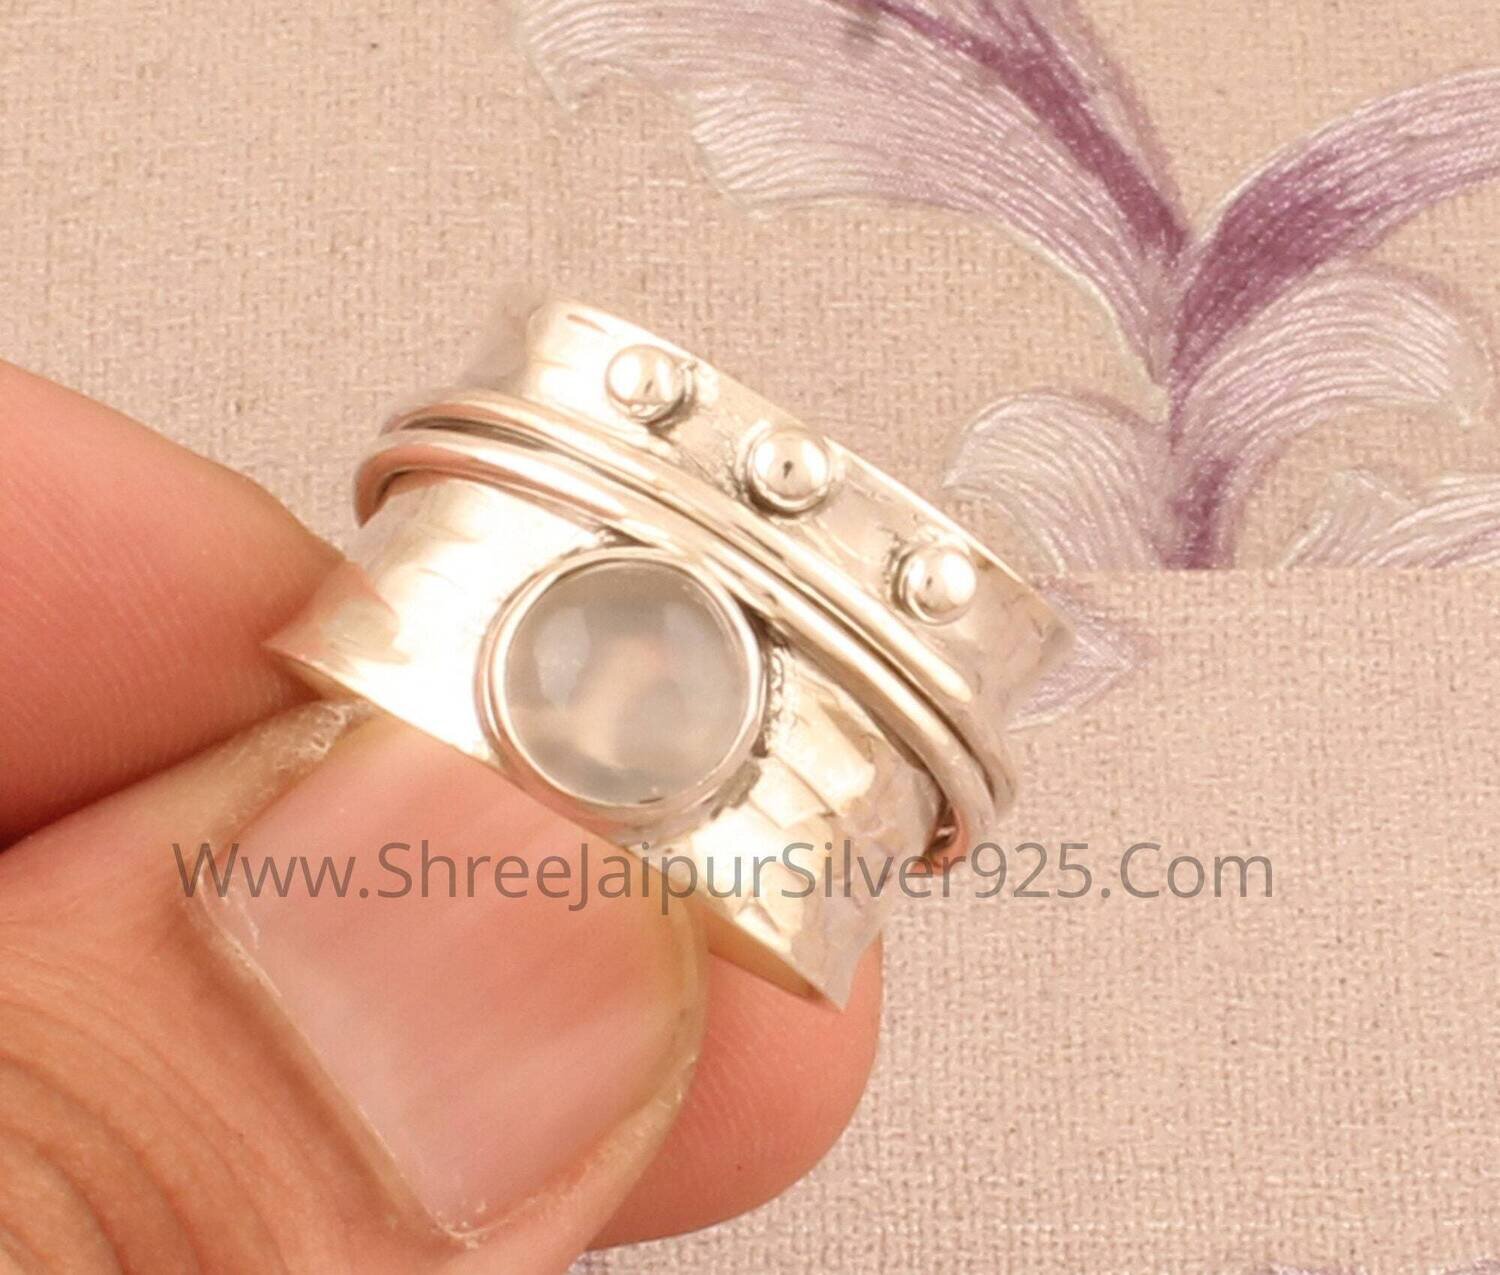 Rose Quartz Hammered Silver Band Ring Solid 925 Sterling Silver Spinner Ring For Women, Handmade Round Stone Ring, Meditation Boho Jewelry